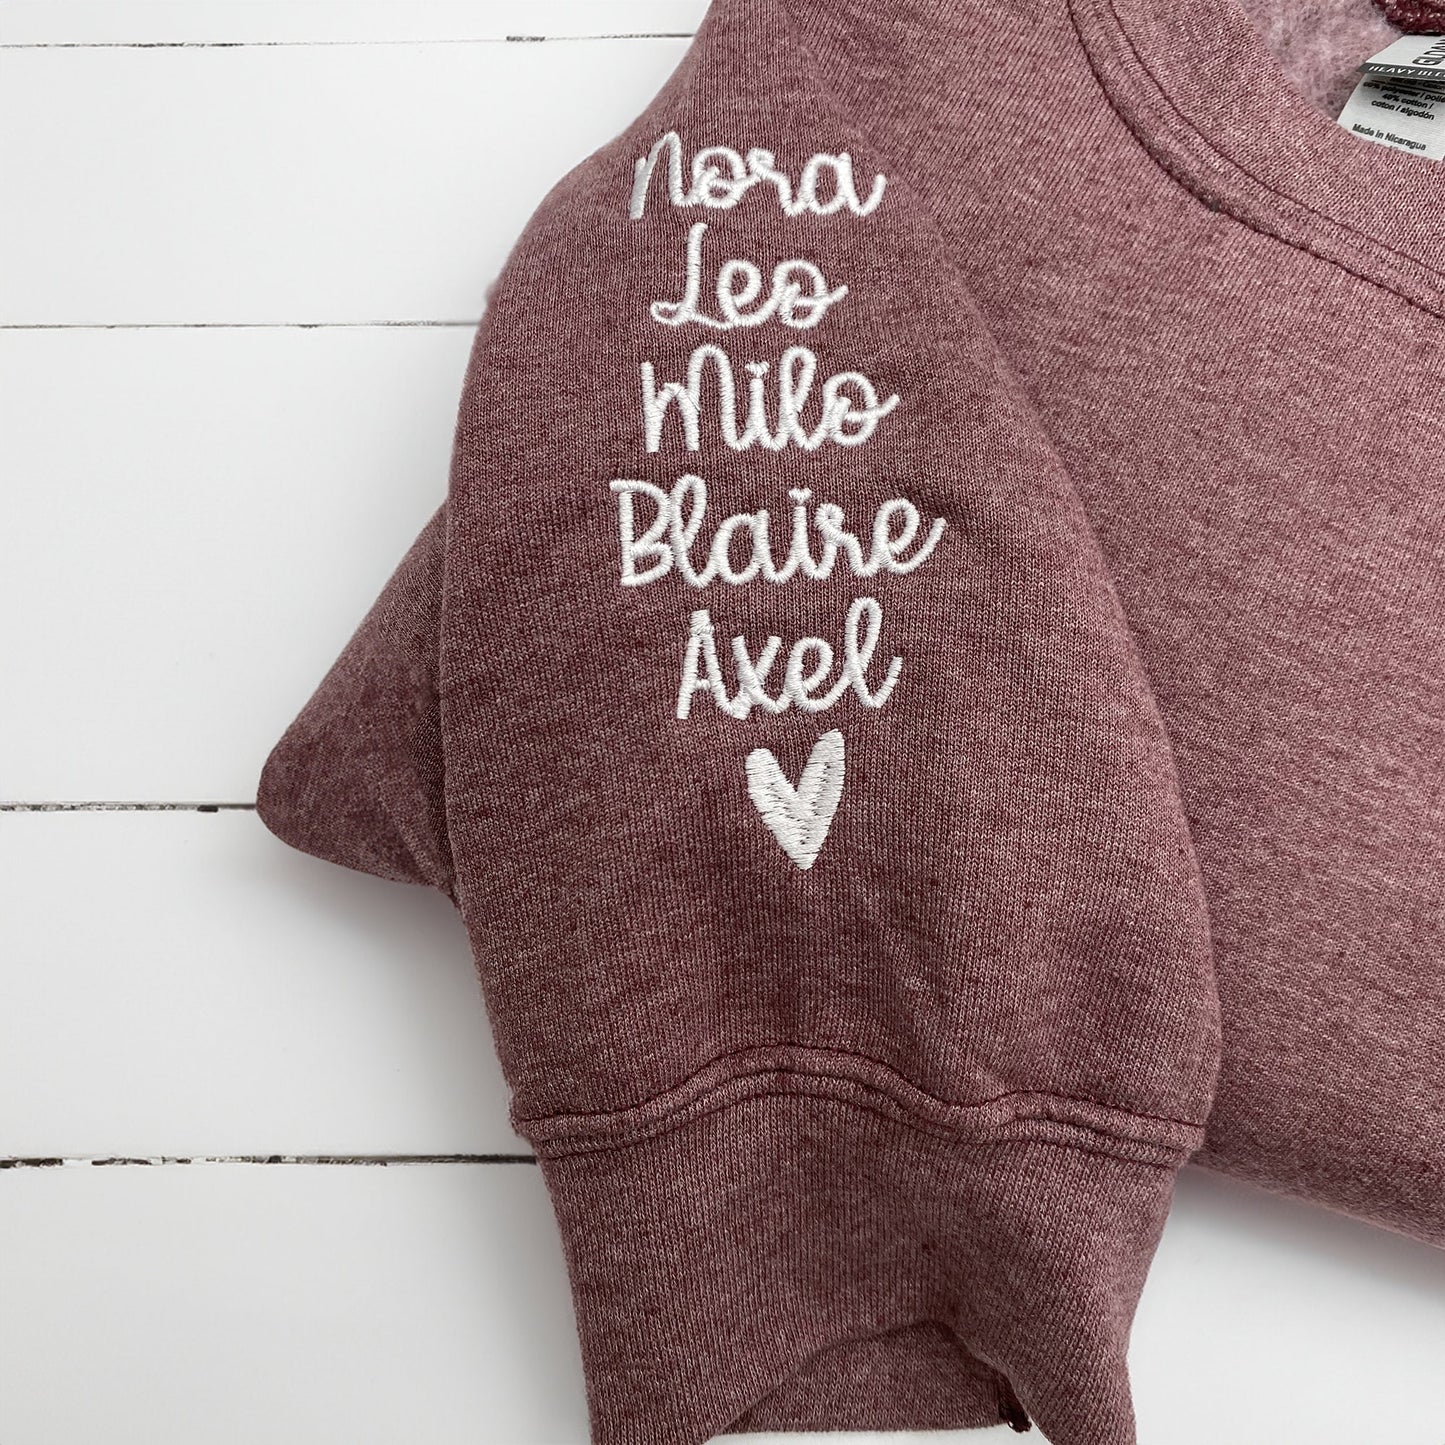 Embroidered 'Mama' Sweatshirt with Kids' Names - Special Gift for Moms